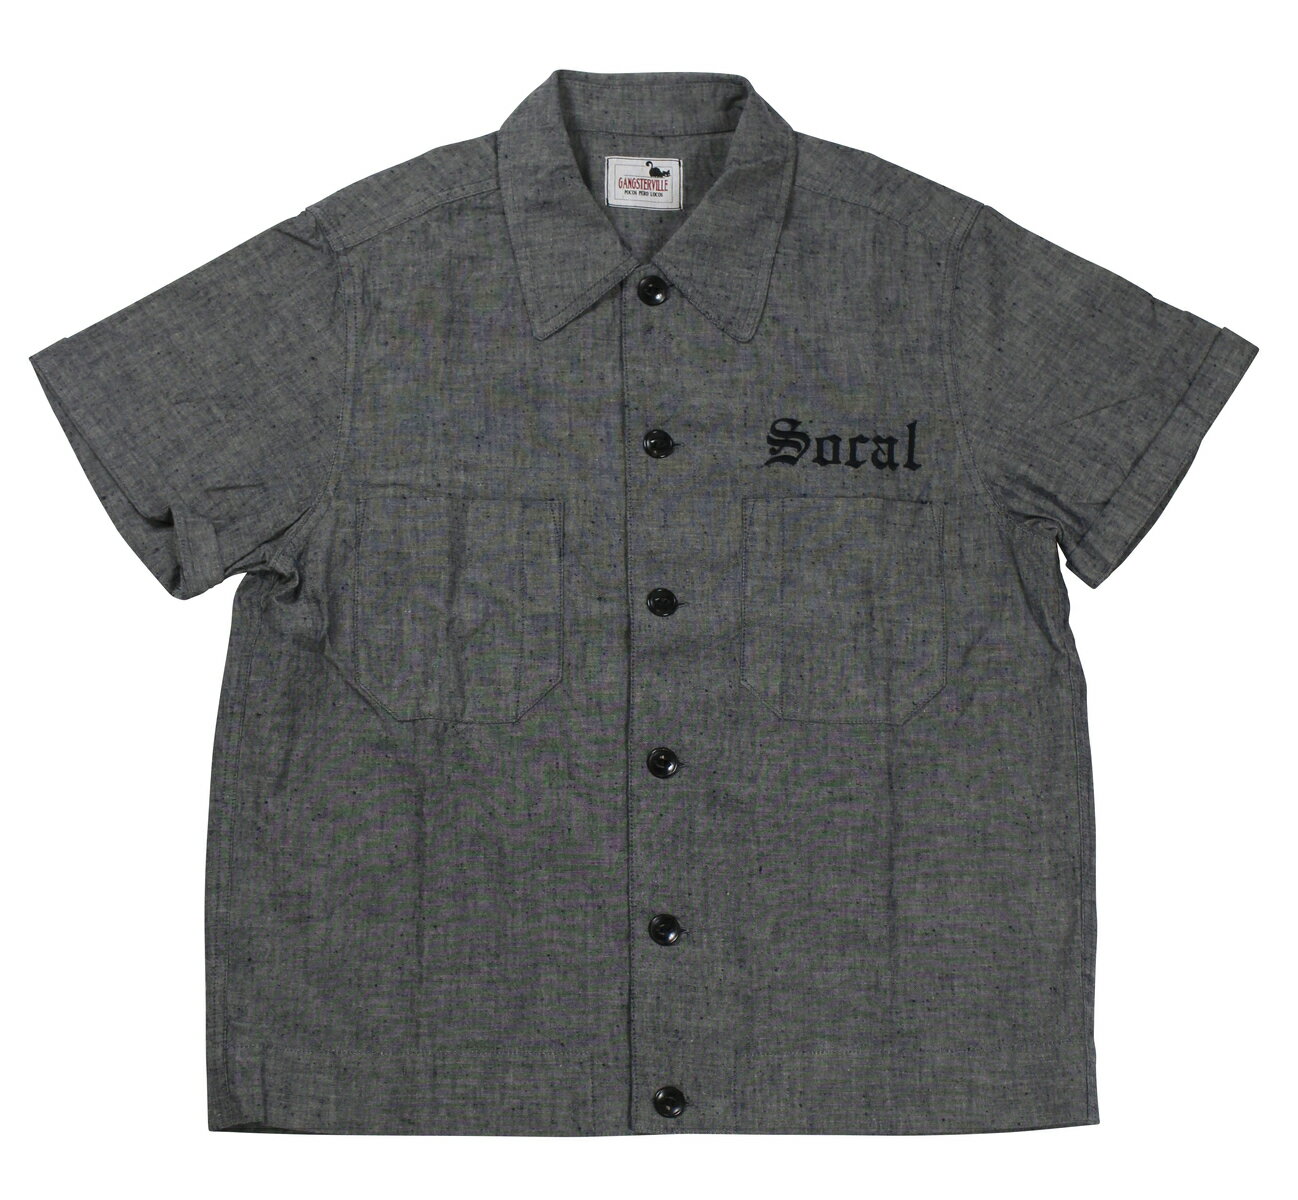 GANGSTERVILLE [-SOCAL - S/S SLICK SHIRTS- GRAY size.S,M,L,XL]